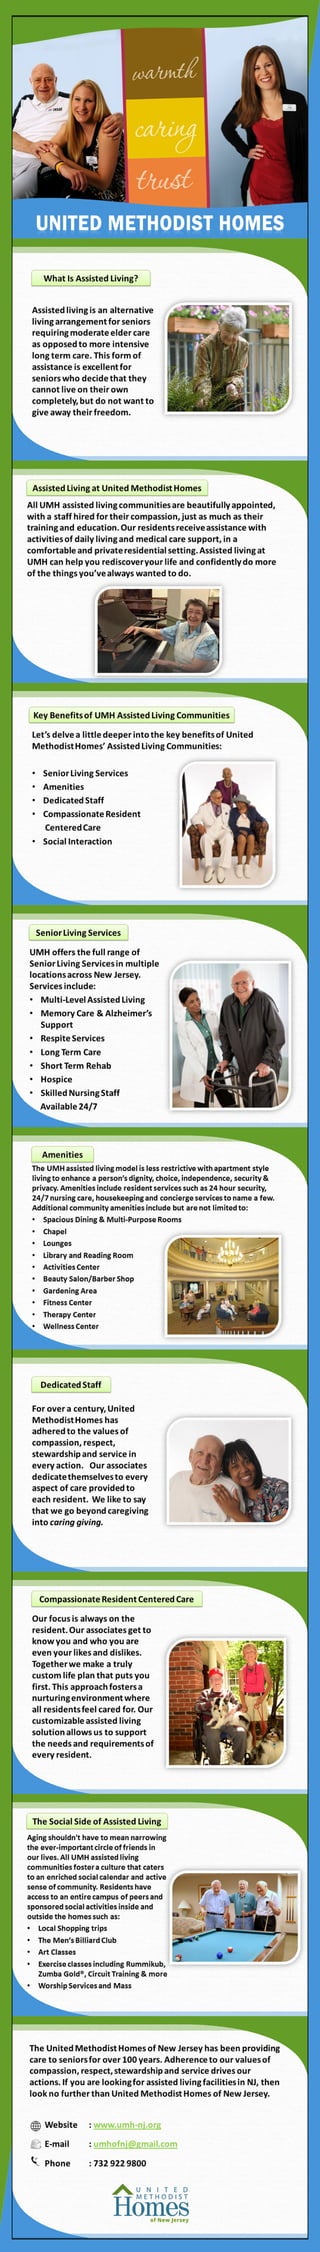 Benefits of Assisted Living